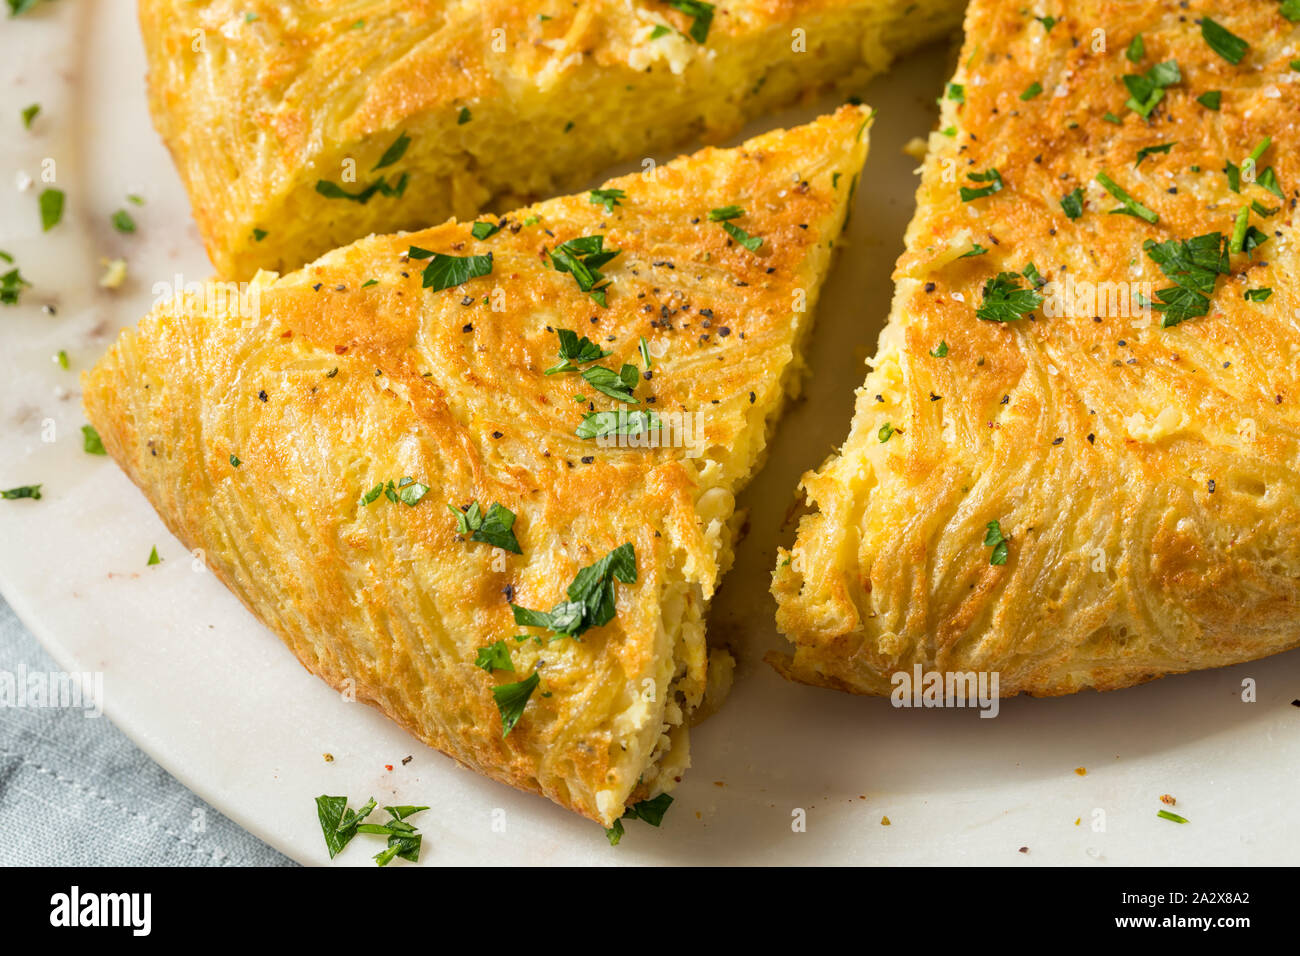 Homemade Spaghetti Omelette with Eggs and Parsley Stock Photo